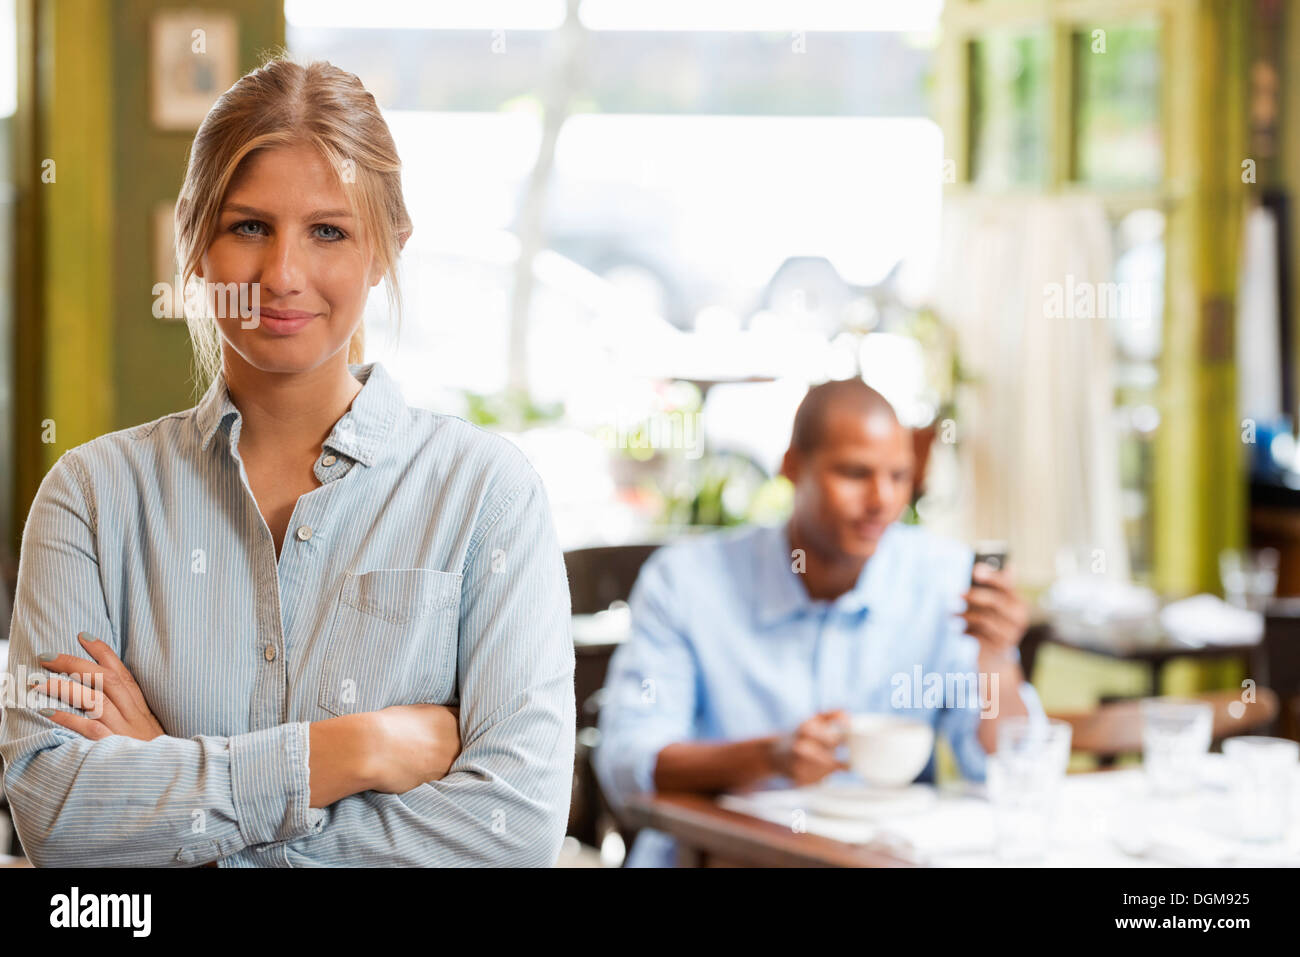 A couple in a city coffee shop. A woman sitting down checking a smart phone. A man standing up with arms folded. Stock Photo